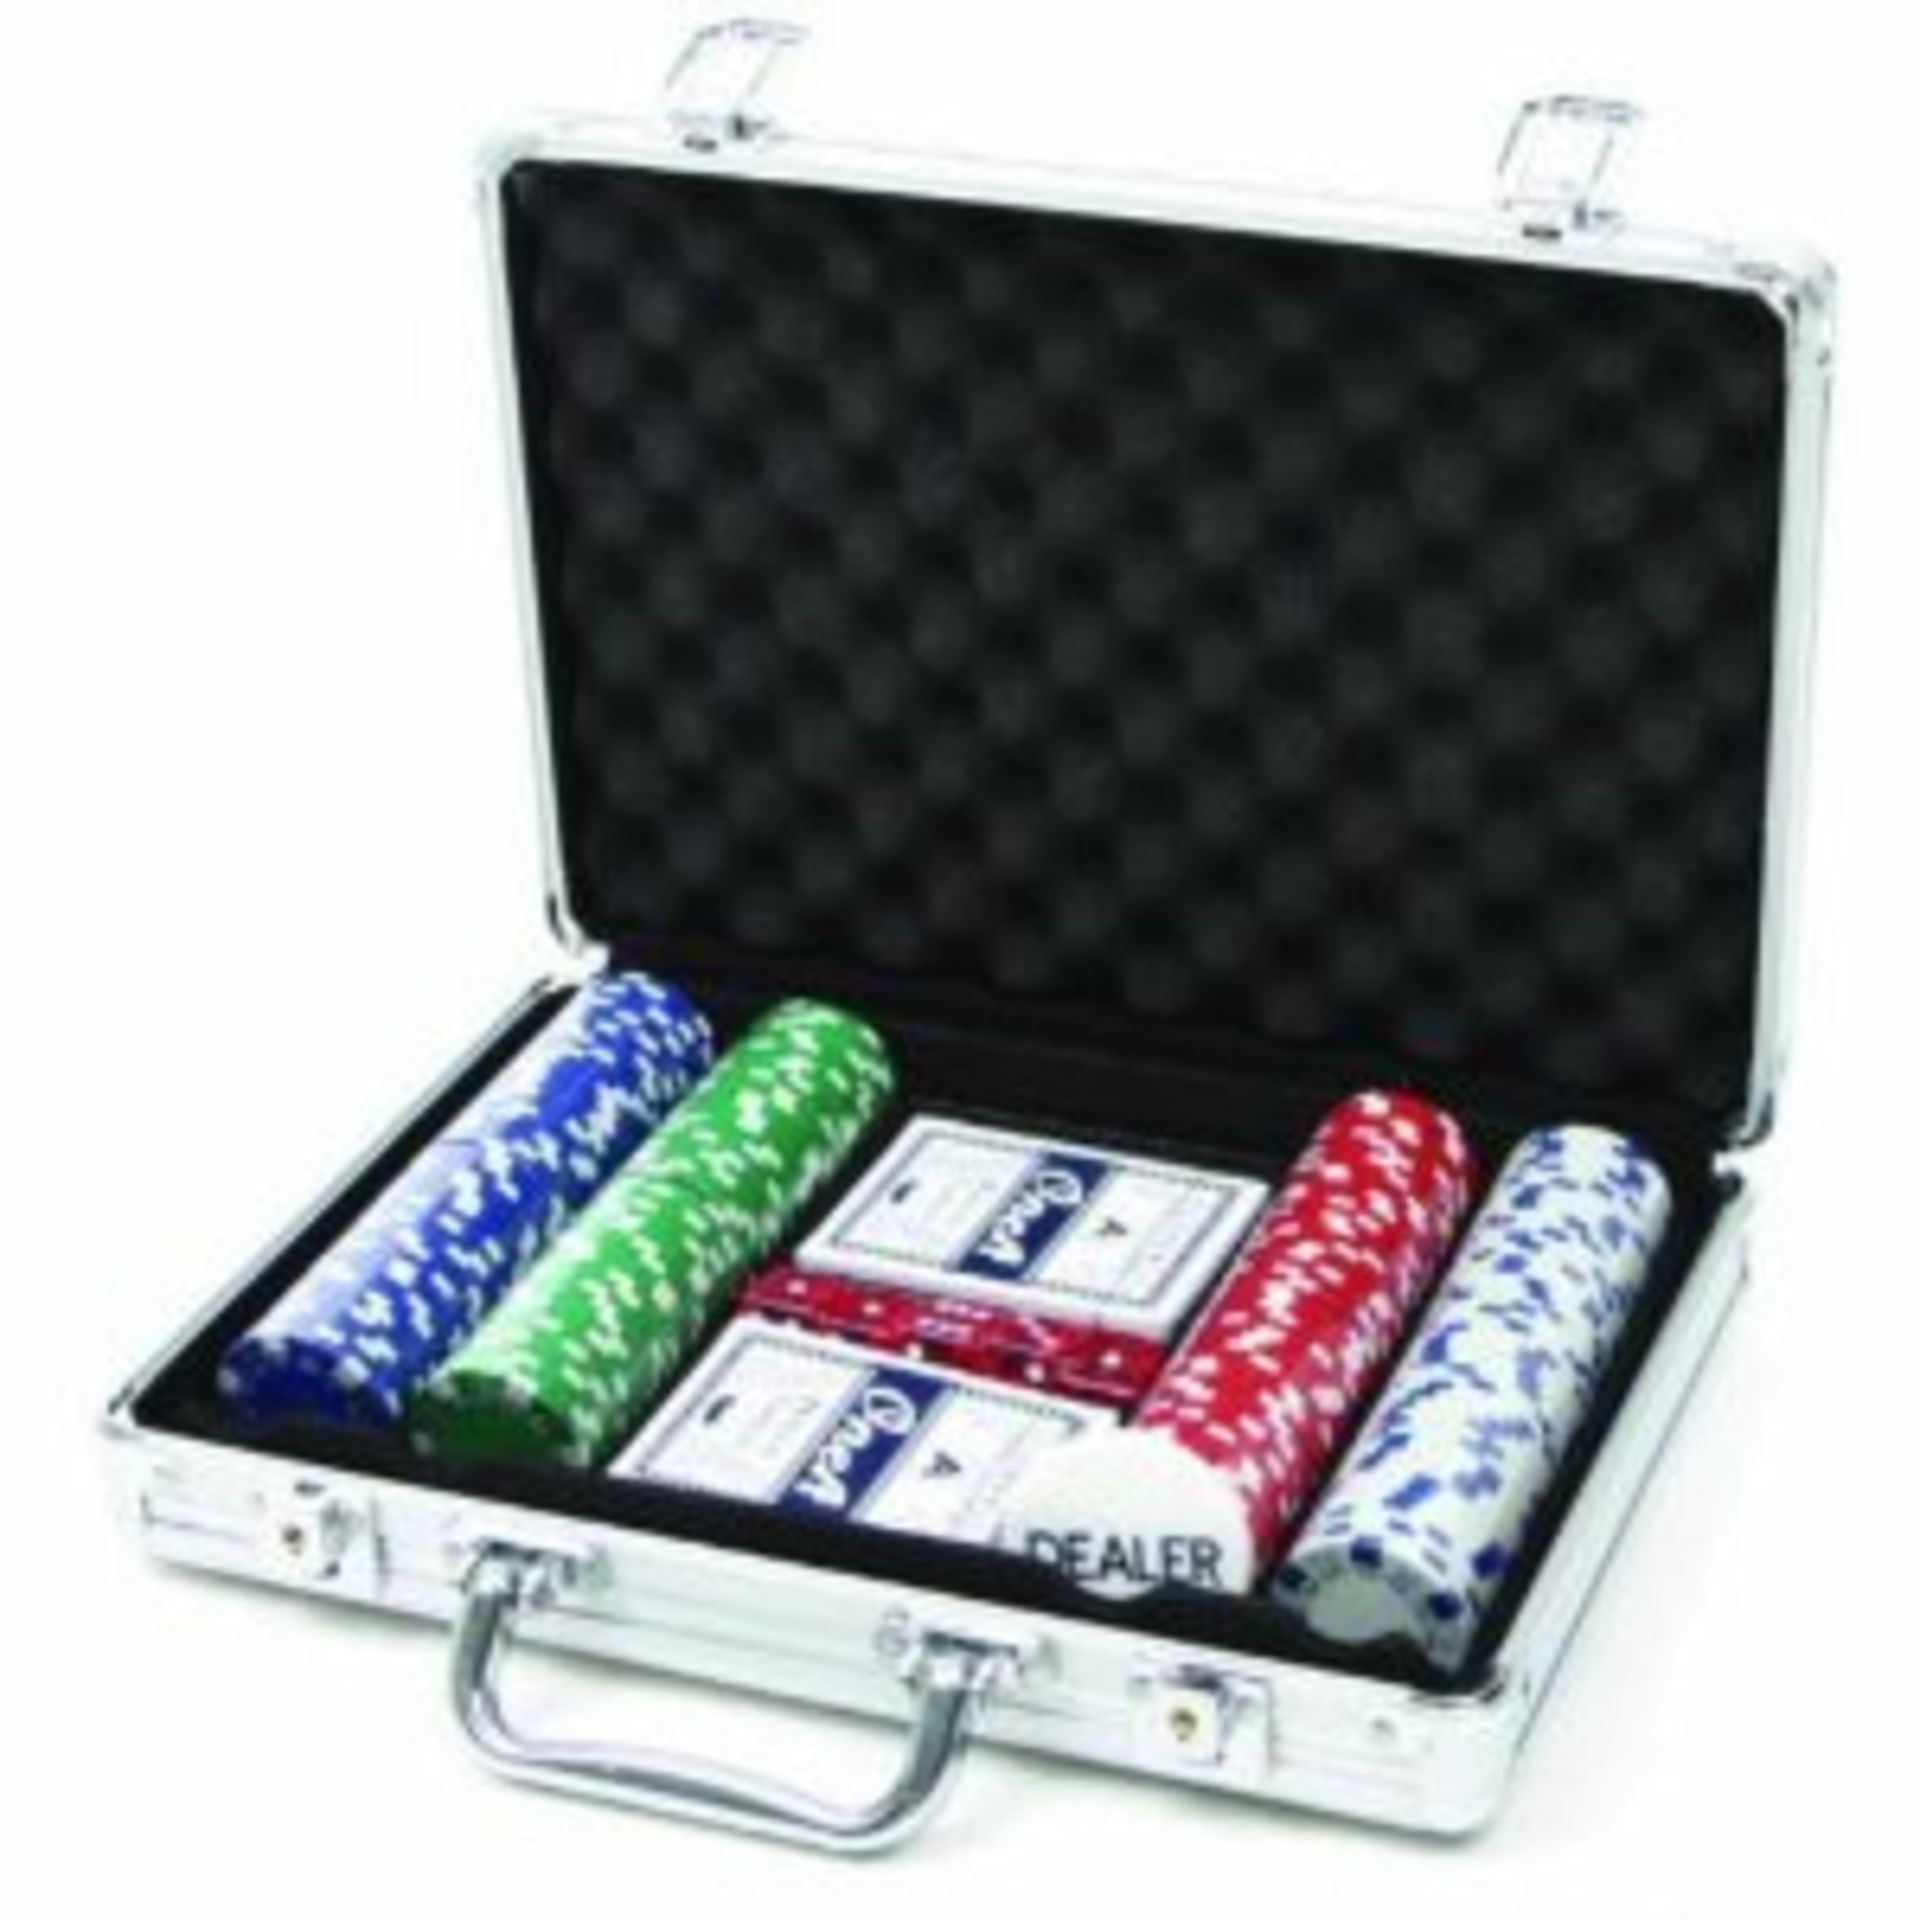 V Two hundred piece Poker and Gaming Set in aluminium case RRP 39.99